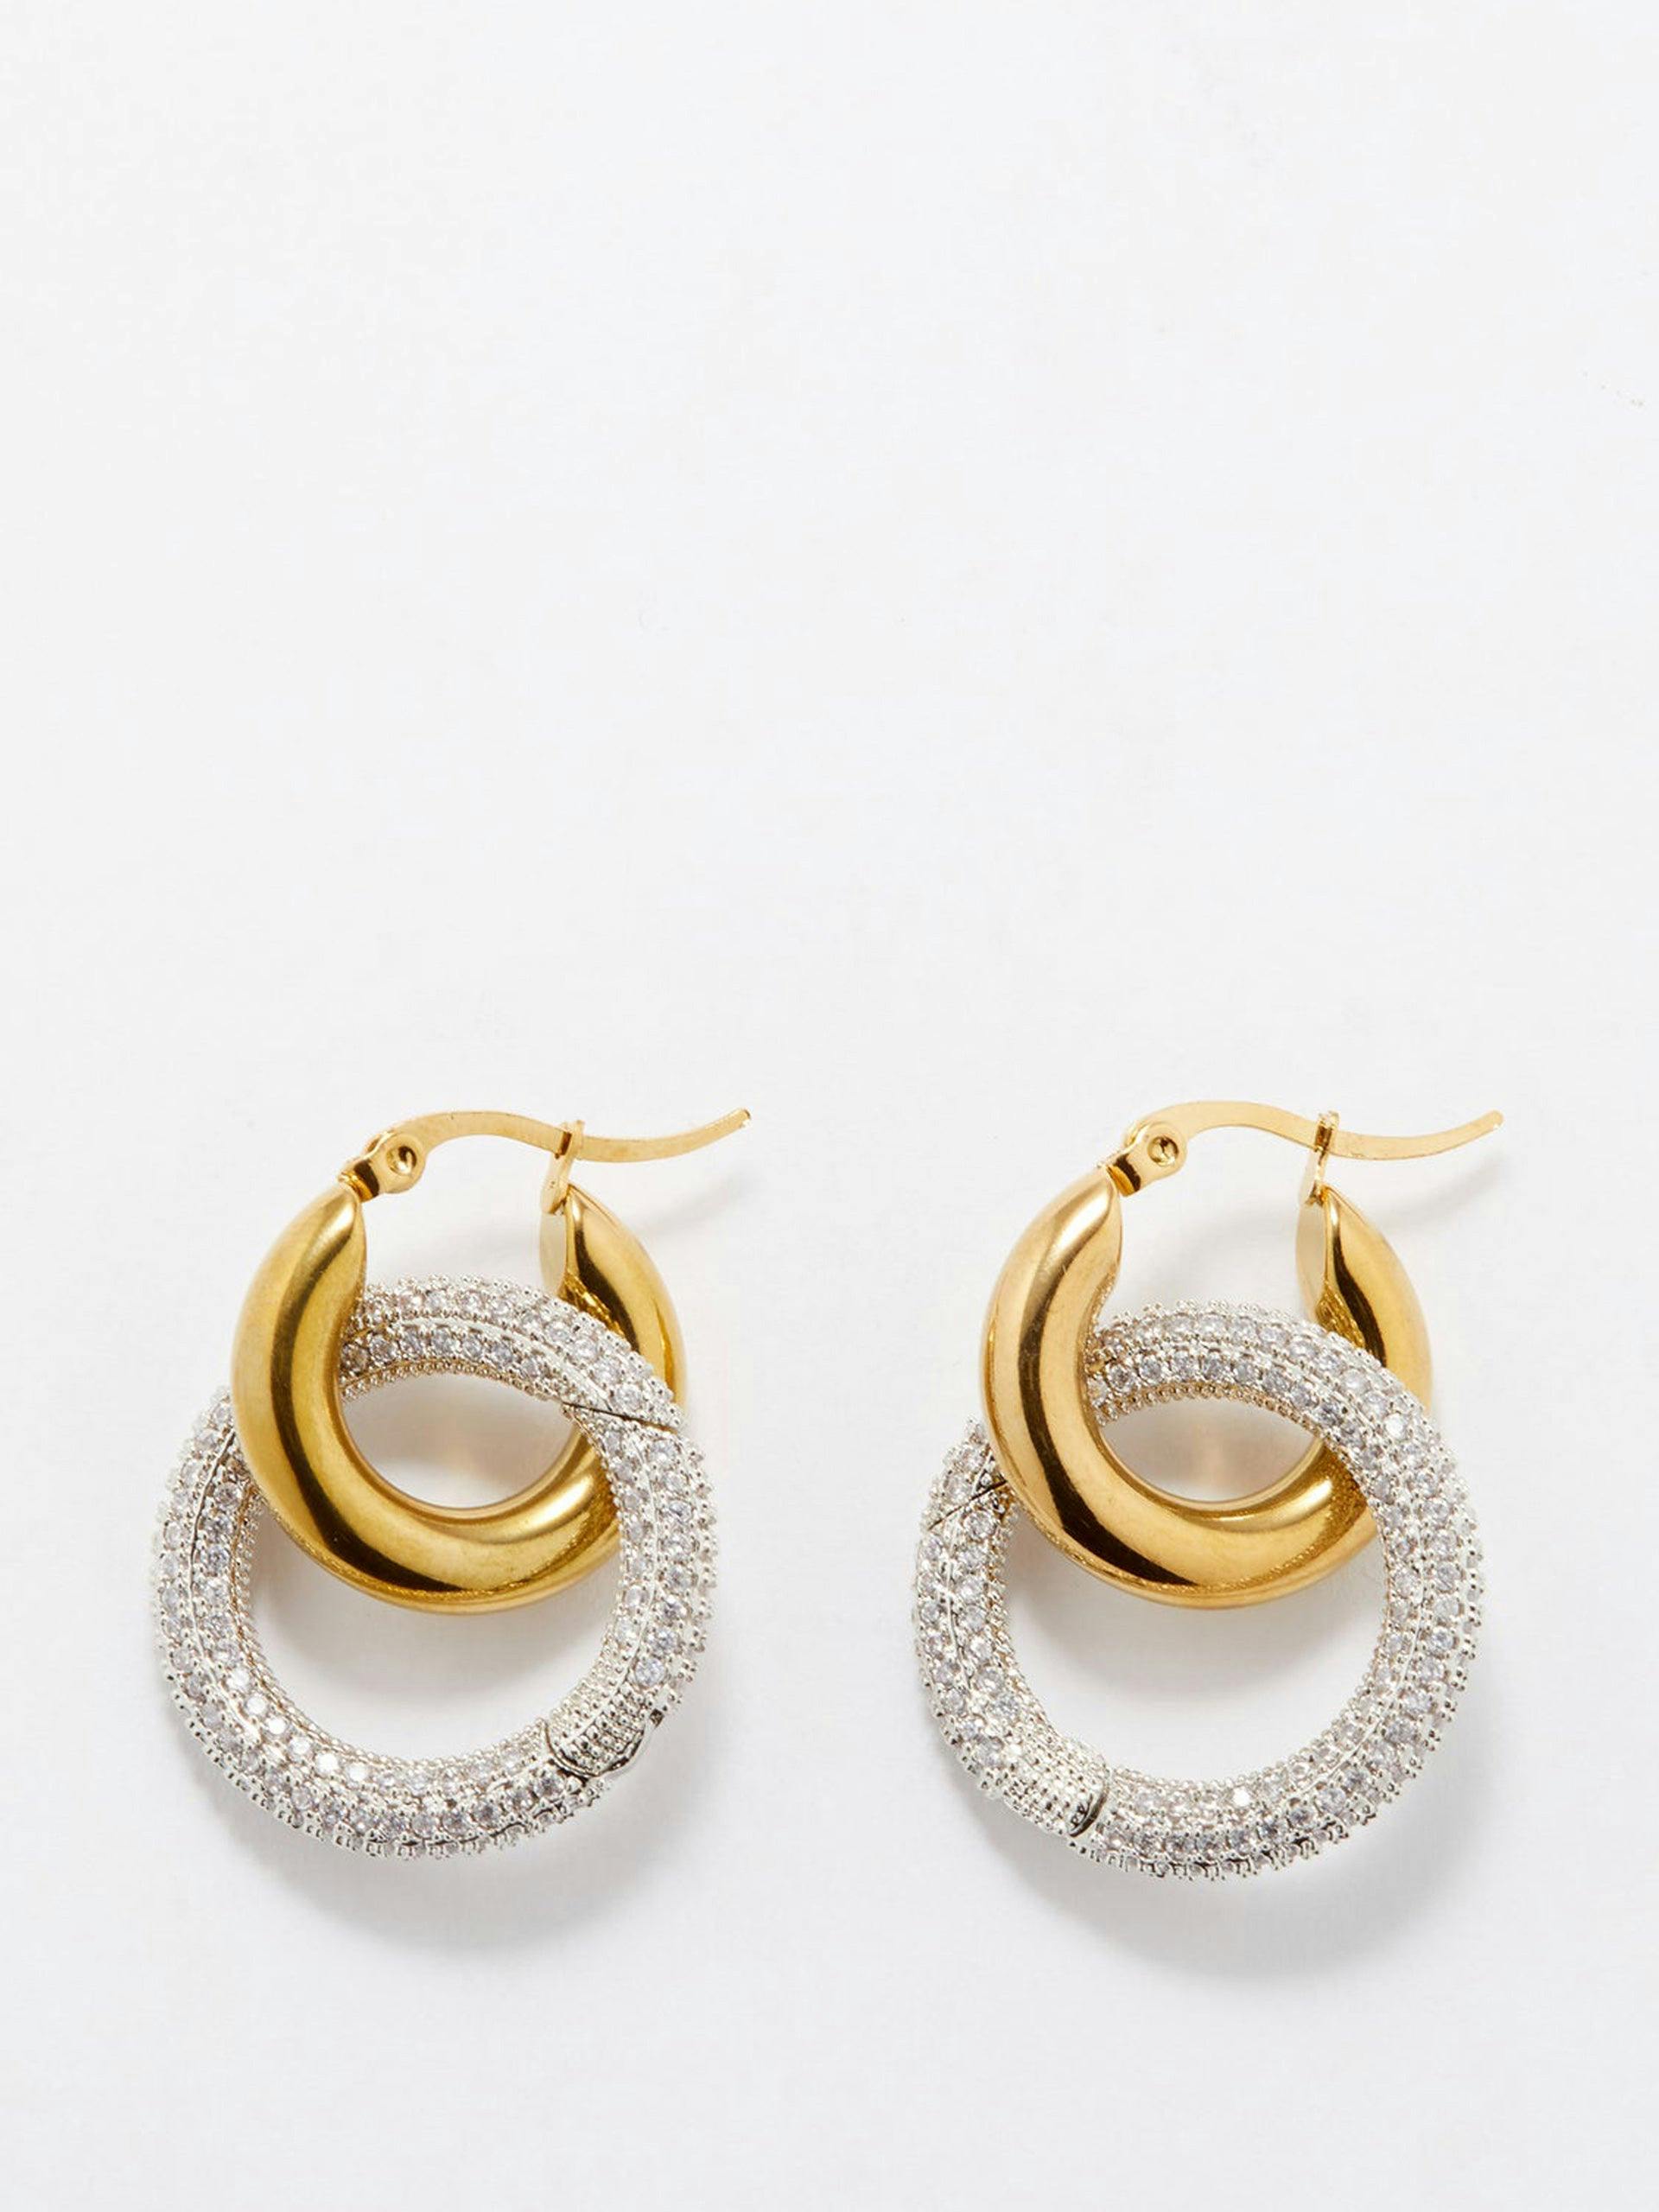 Earrings with removable crystal hoops